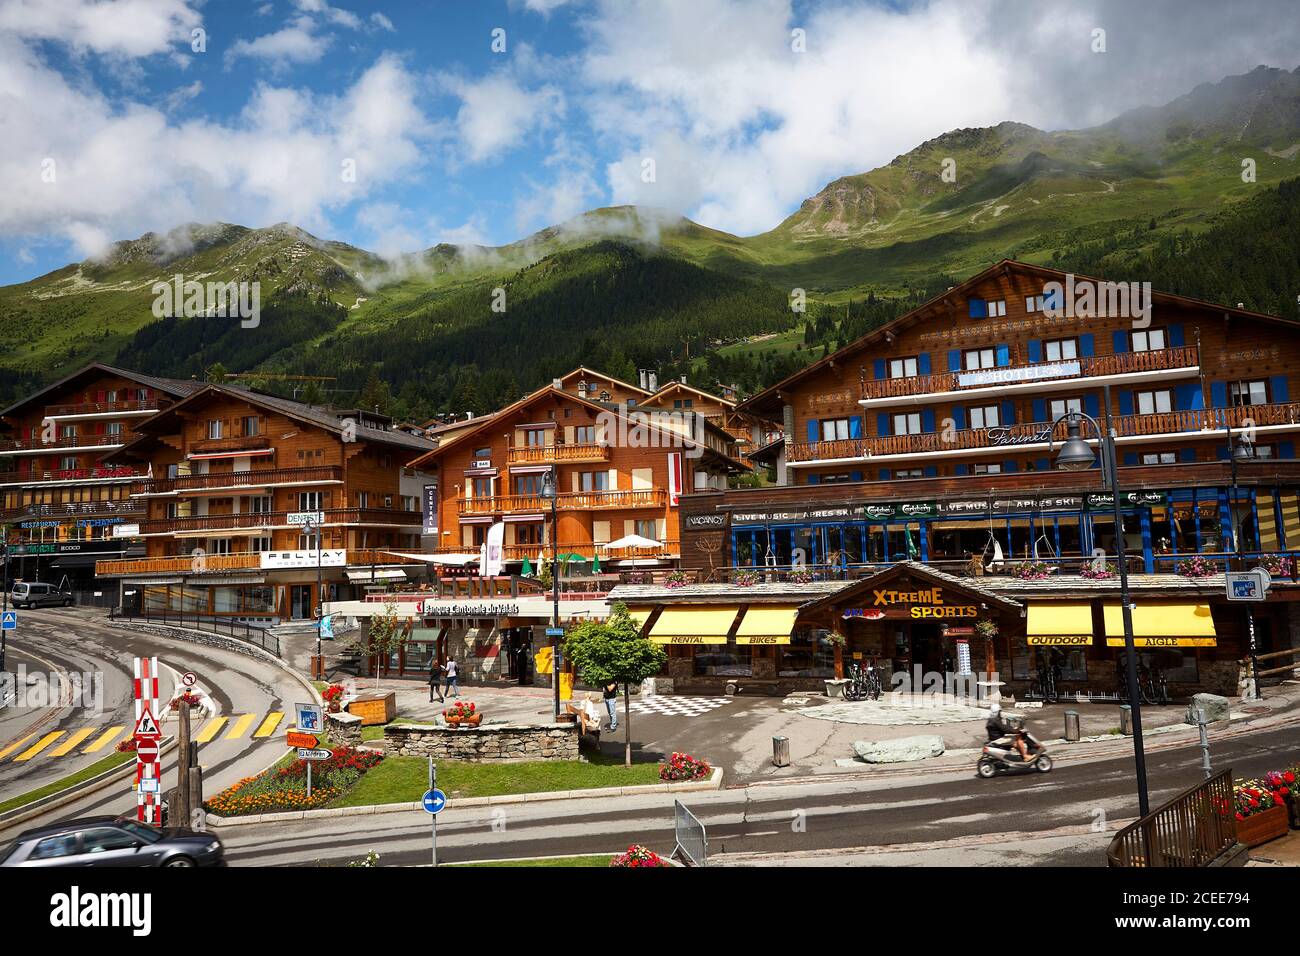 Big houses and shops in Verbier, Switzerland. Blue sky and cloudy weather in the alpes. Stock Photo